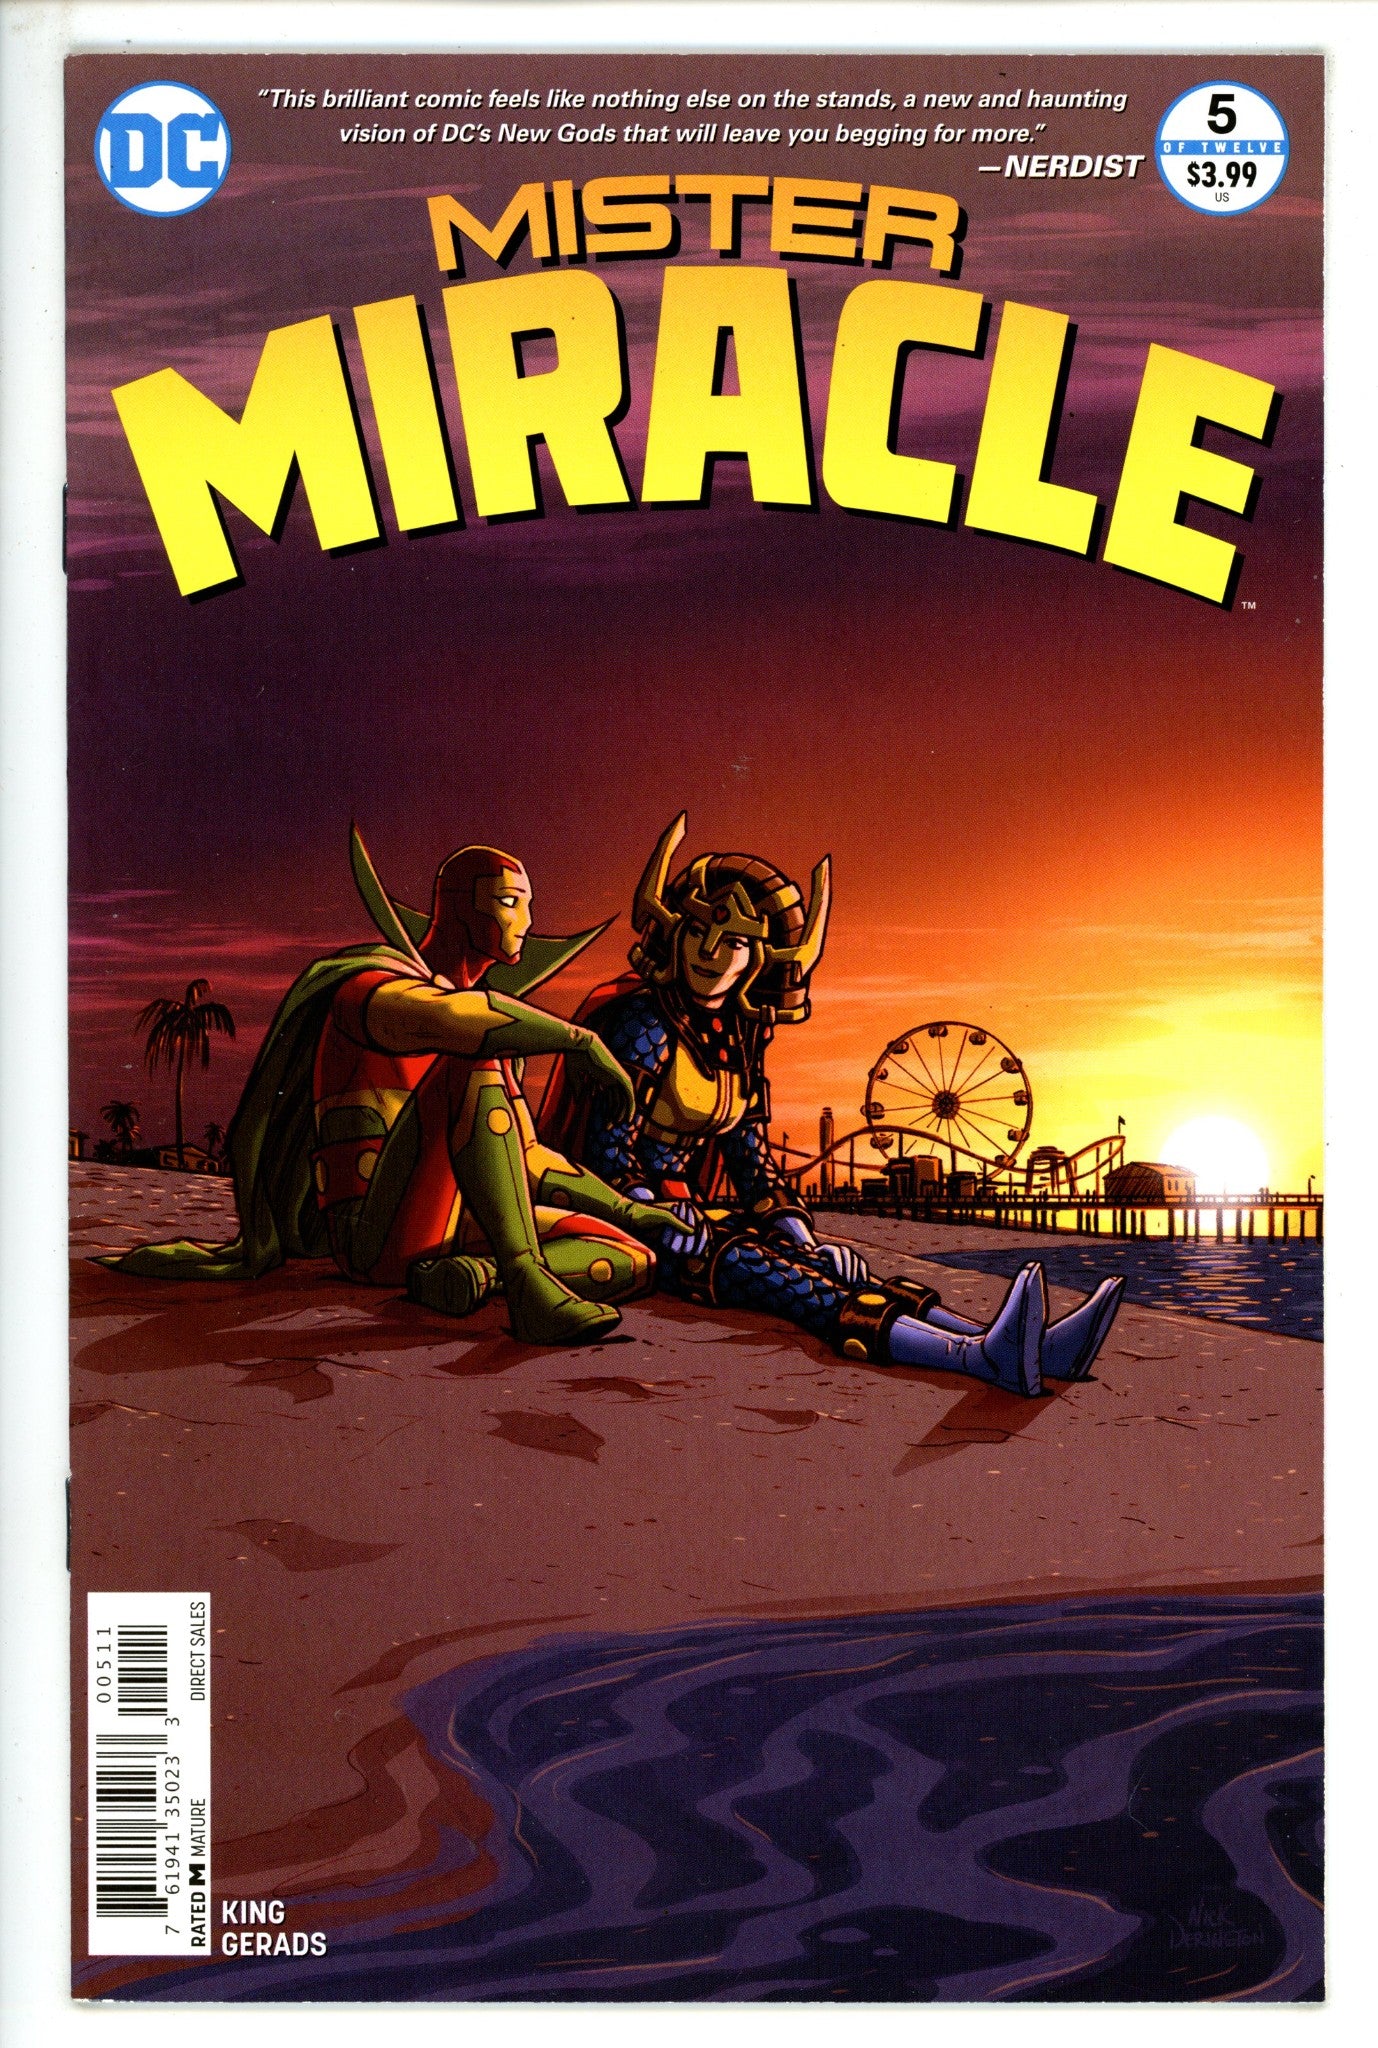 Mister Miracle Vol 4 5 High Grade (2018) 